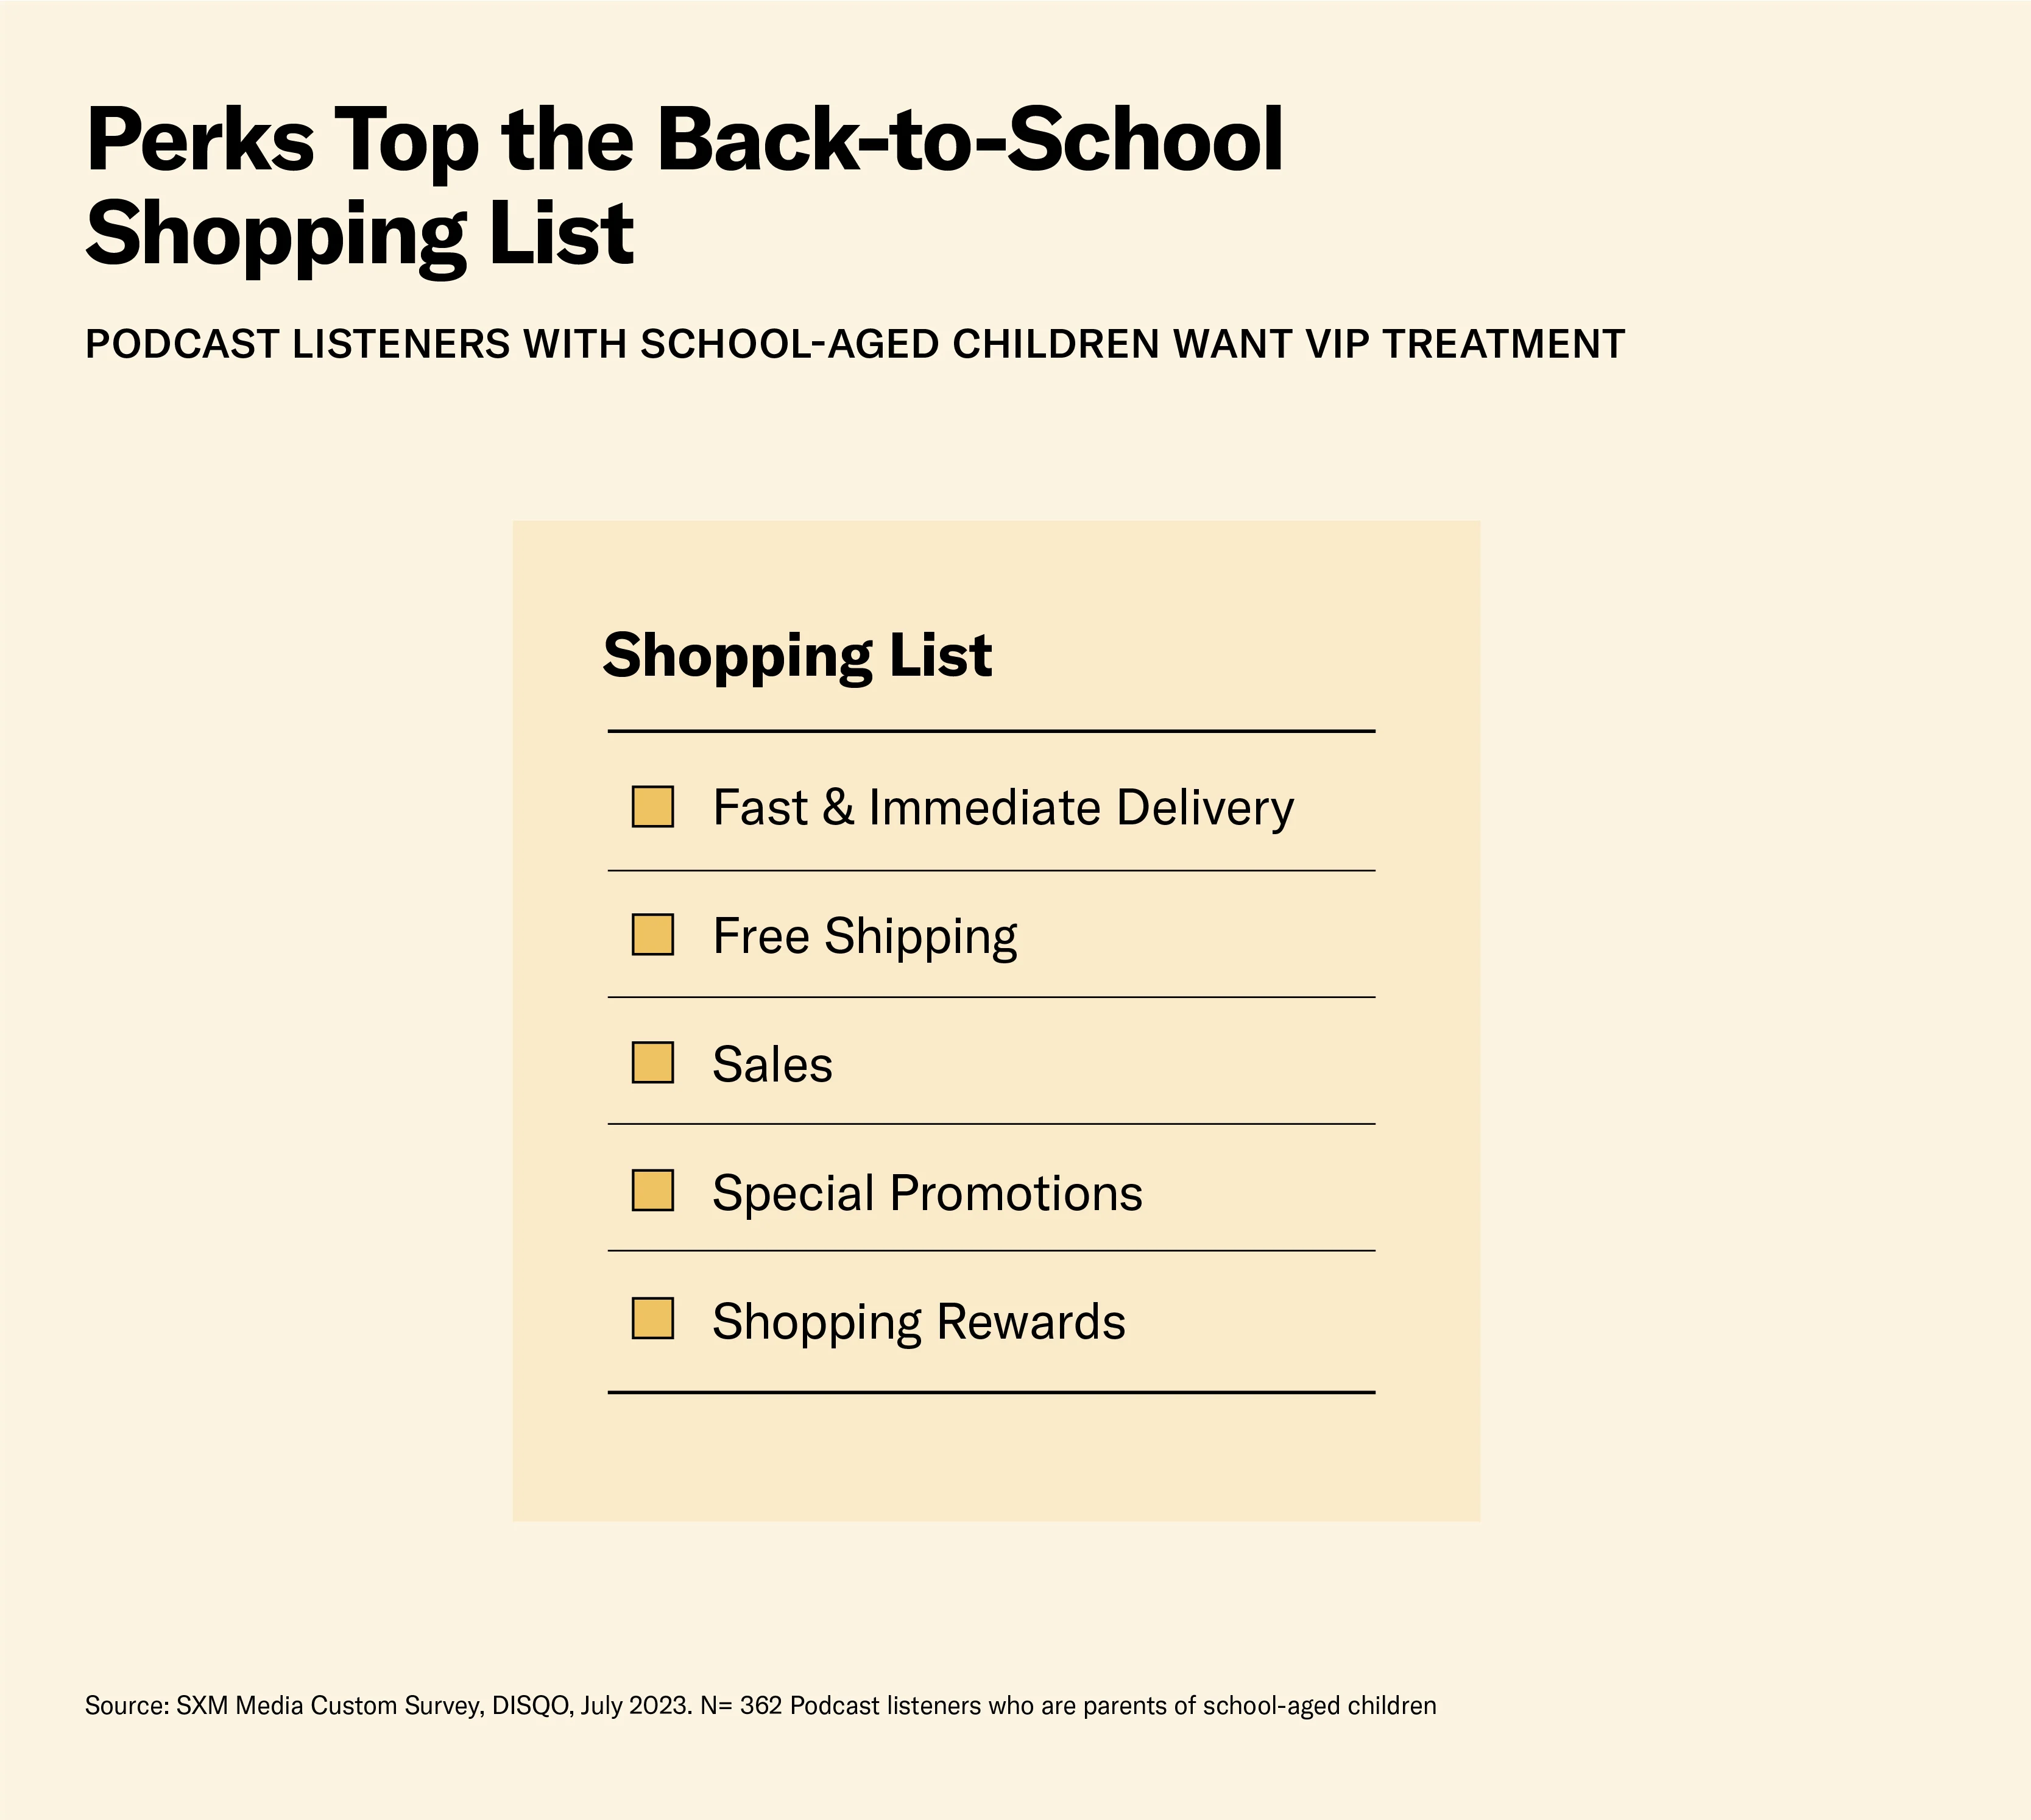 Parents want perks in back-to-school shopping podcast ads